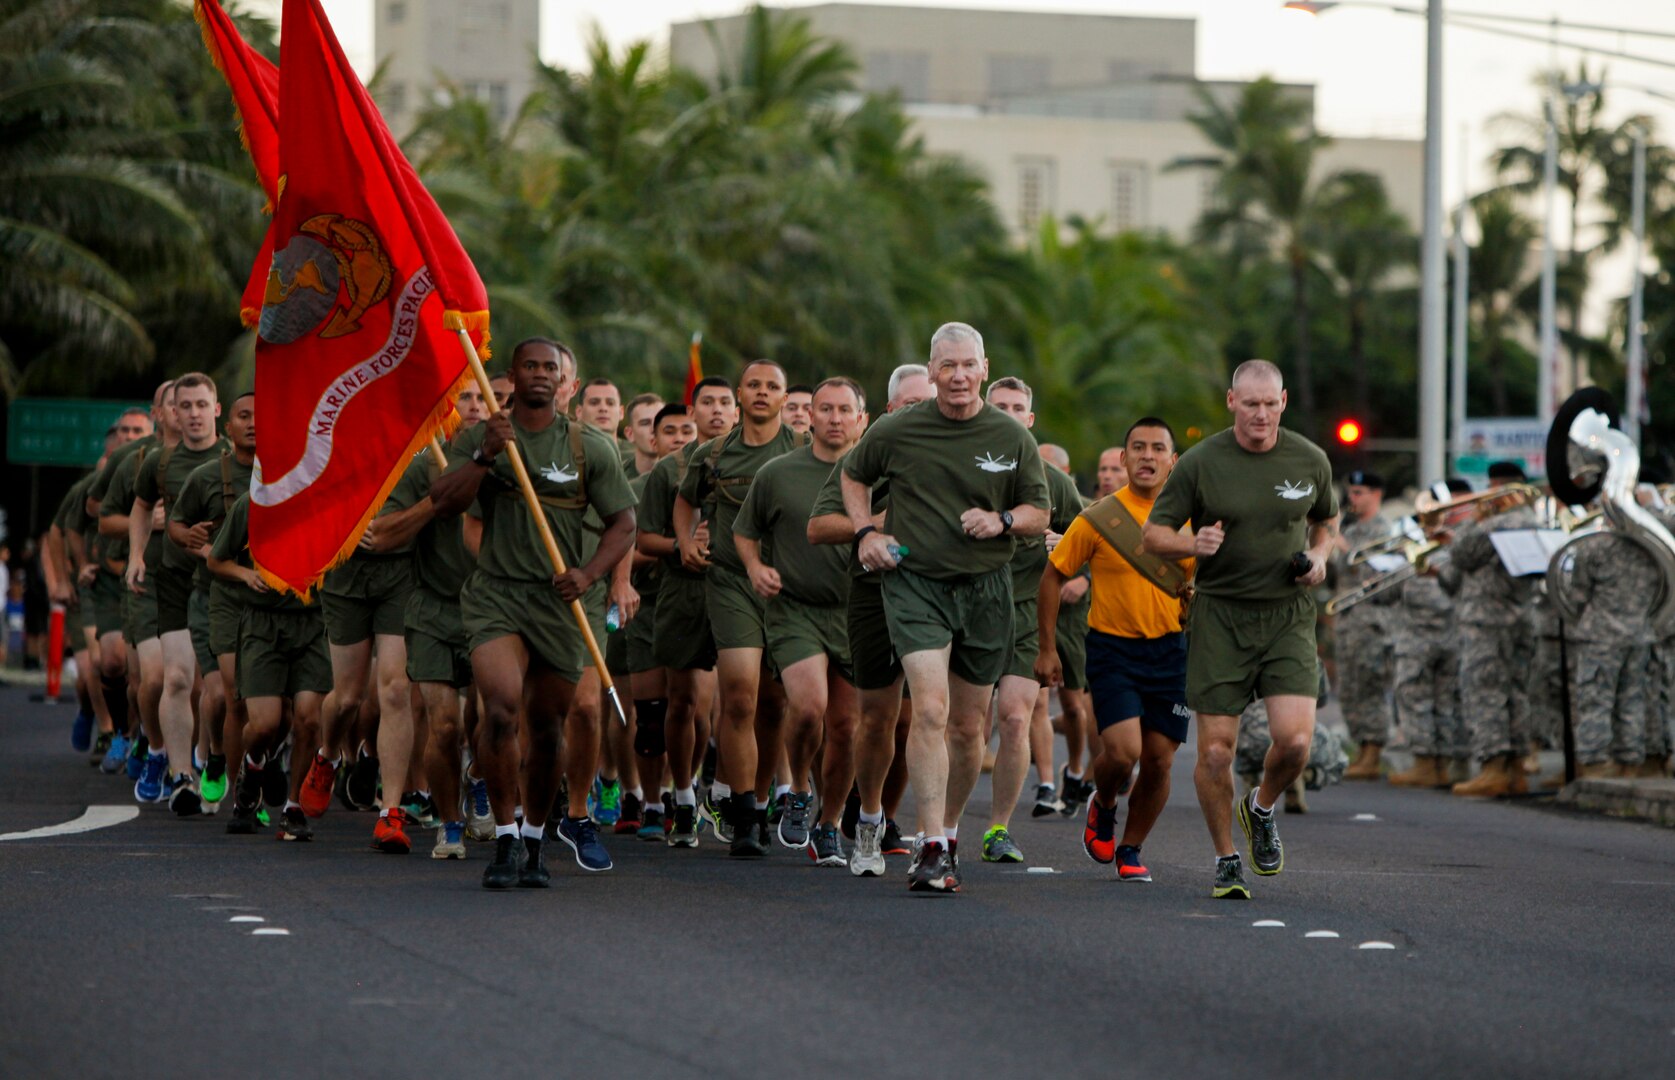 U.S. Marine Corps Lt. Gen. John A. Toolan, commander, U.S. Marine Corps Forces, Pacific, and Sgt. Maj. Paul G. McKenna, force sergeant major, lead a formation with Marines from U.S. Marine Corps Forces, Pacific and Marine Corps Base Hawaii in the Great Aloha Run in Honolulu, Hawaii, Feb. 15, 2016.